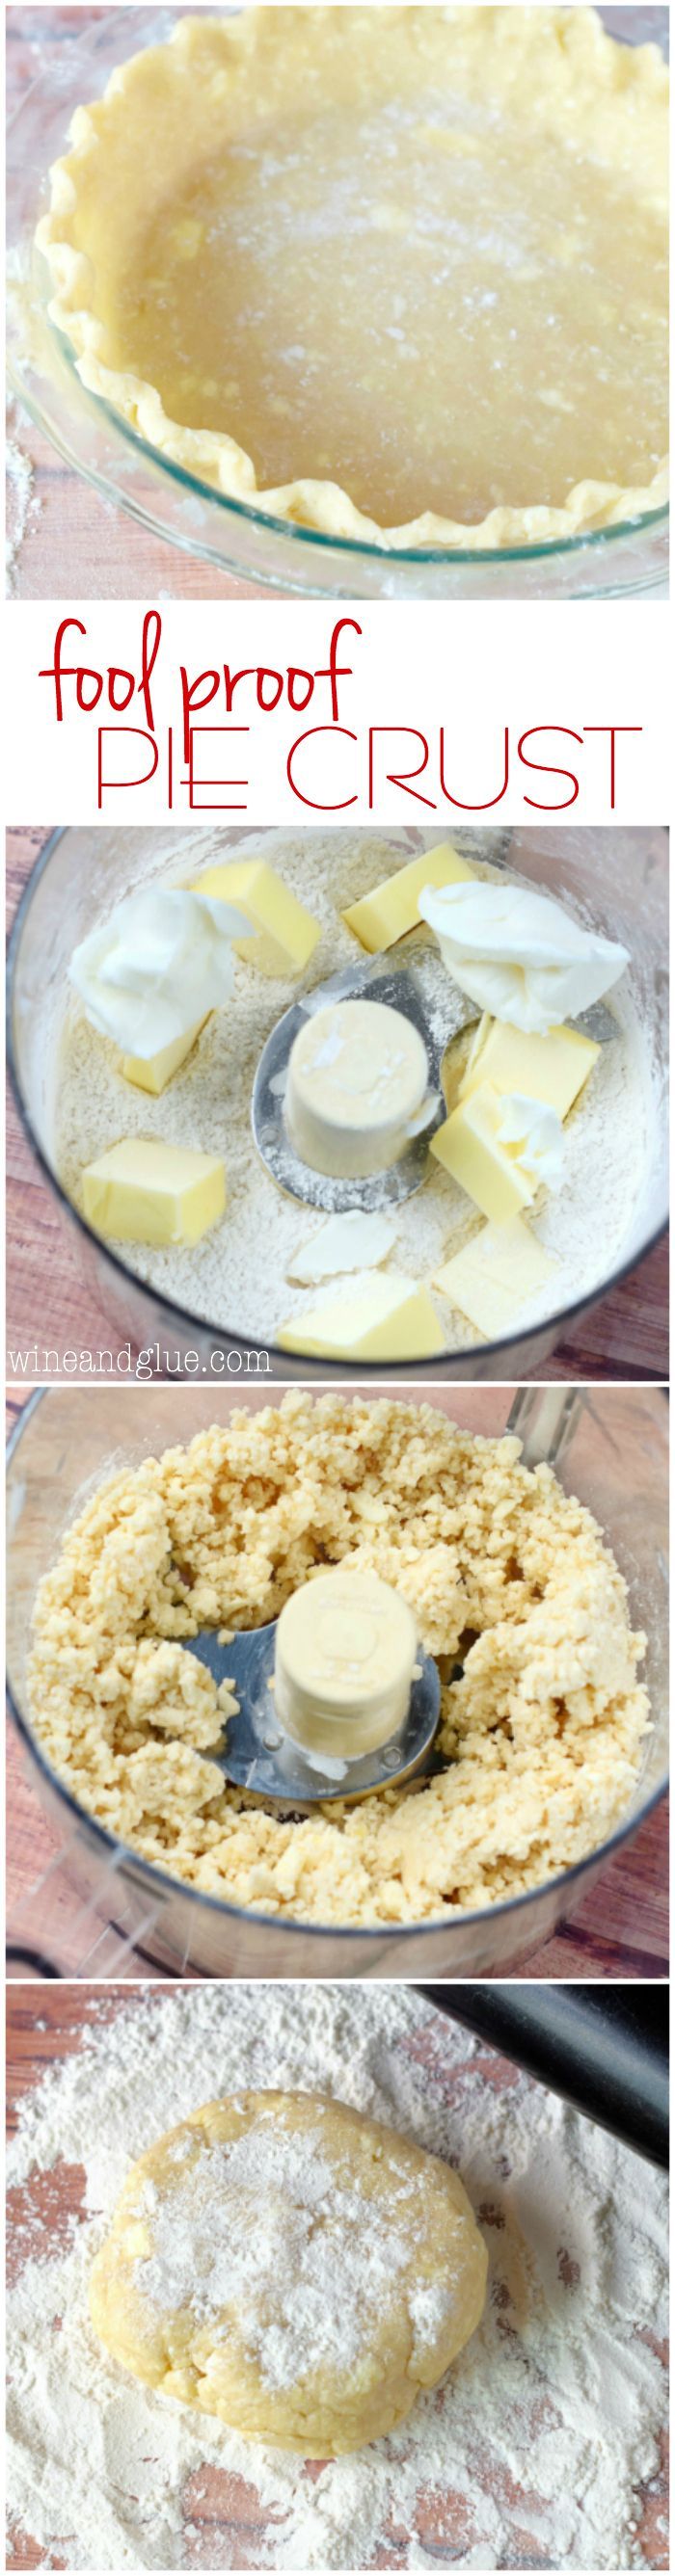 This Fool Proof Pie Crust is seriously so easy, moist and delicious! Step by step photo tutorial!